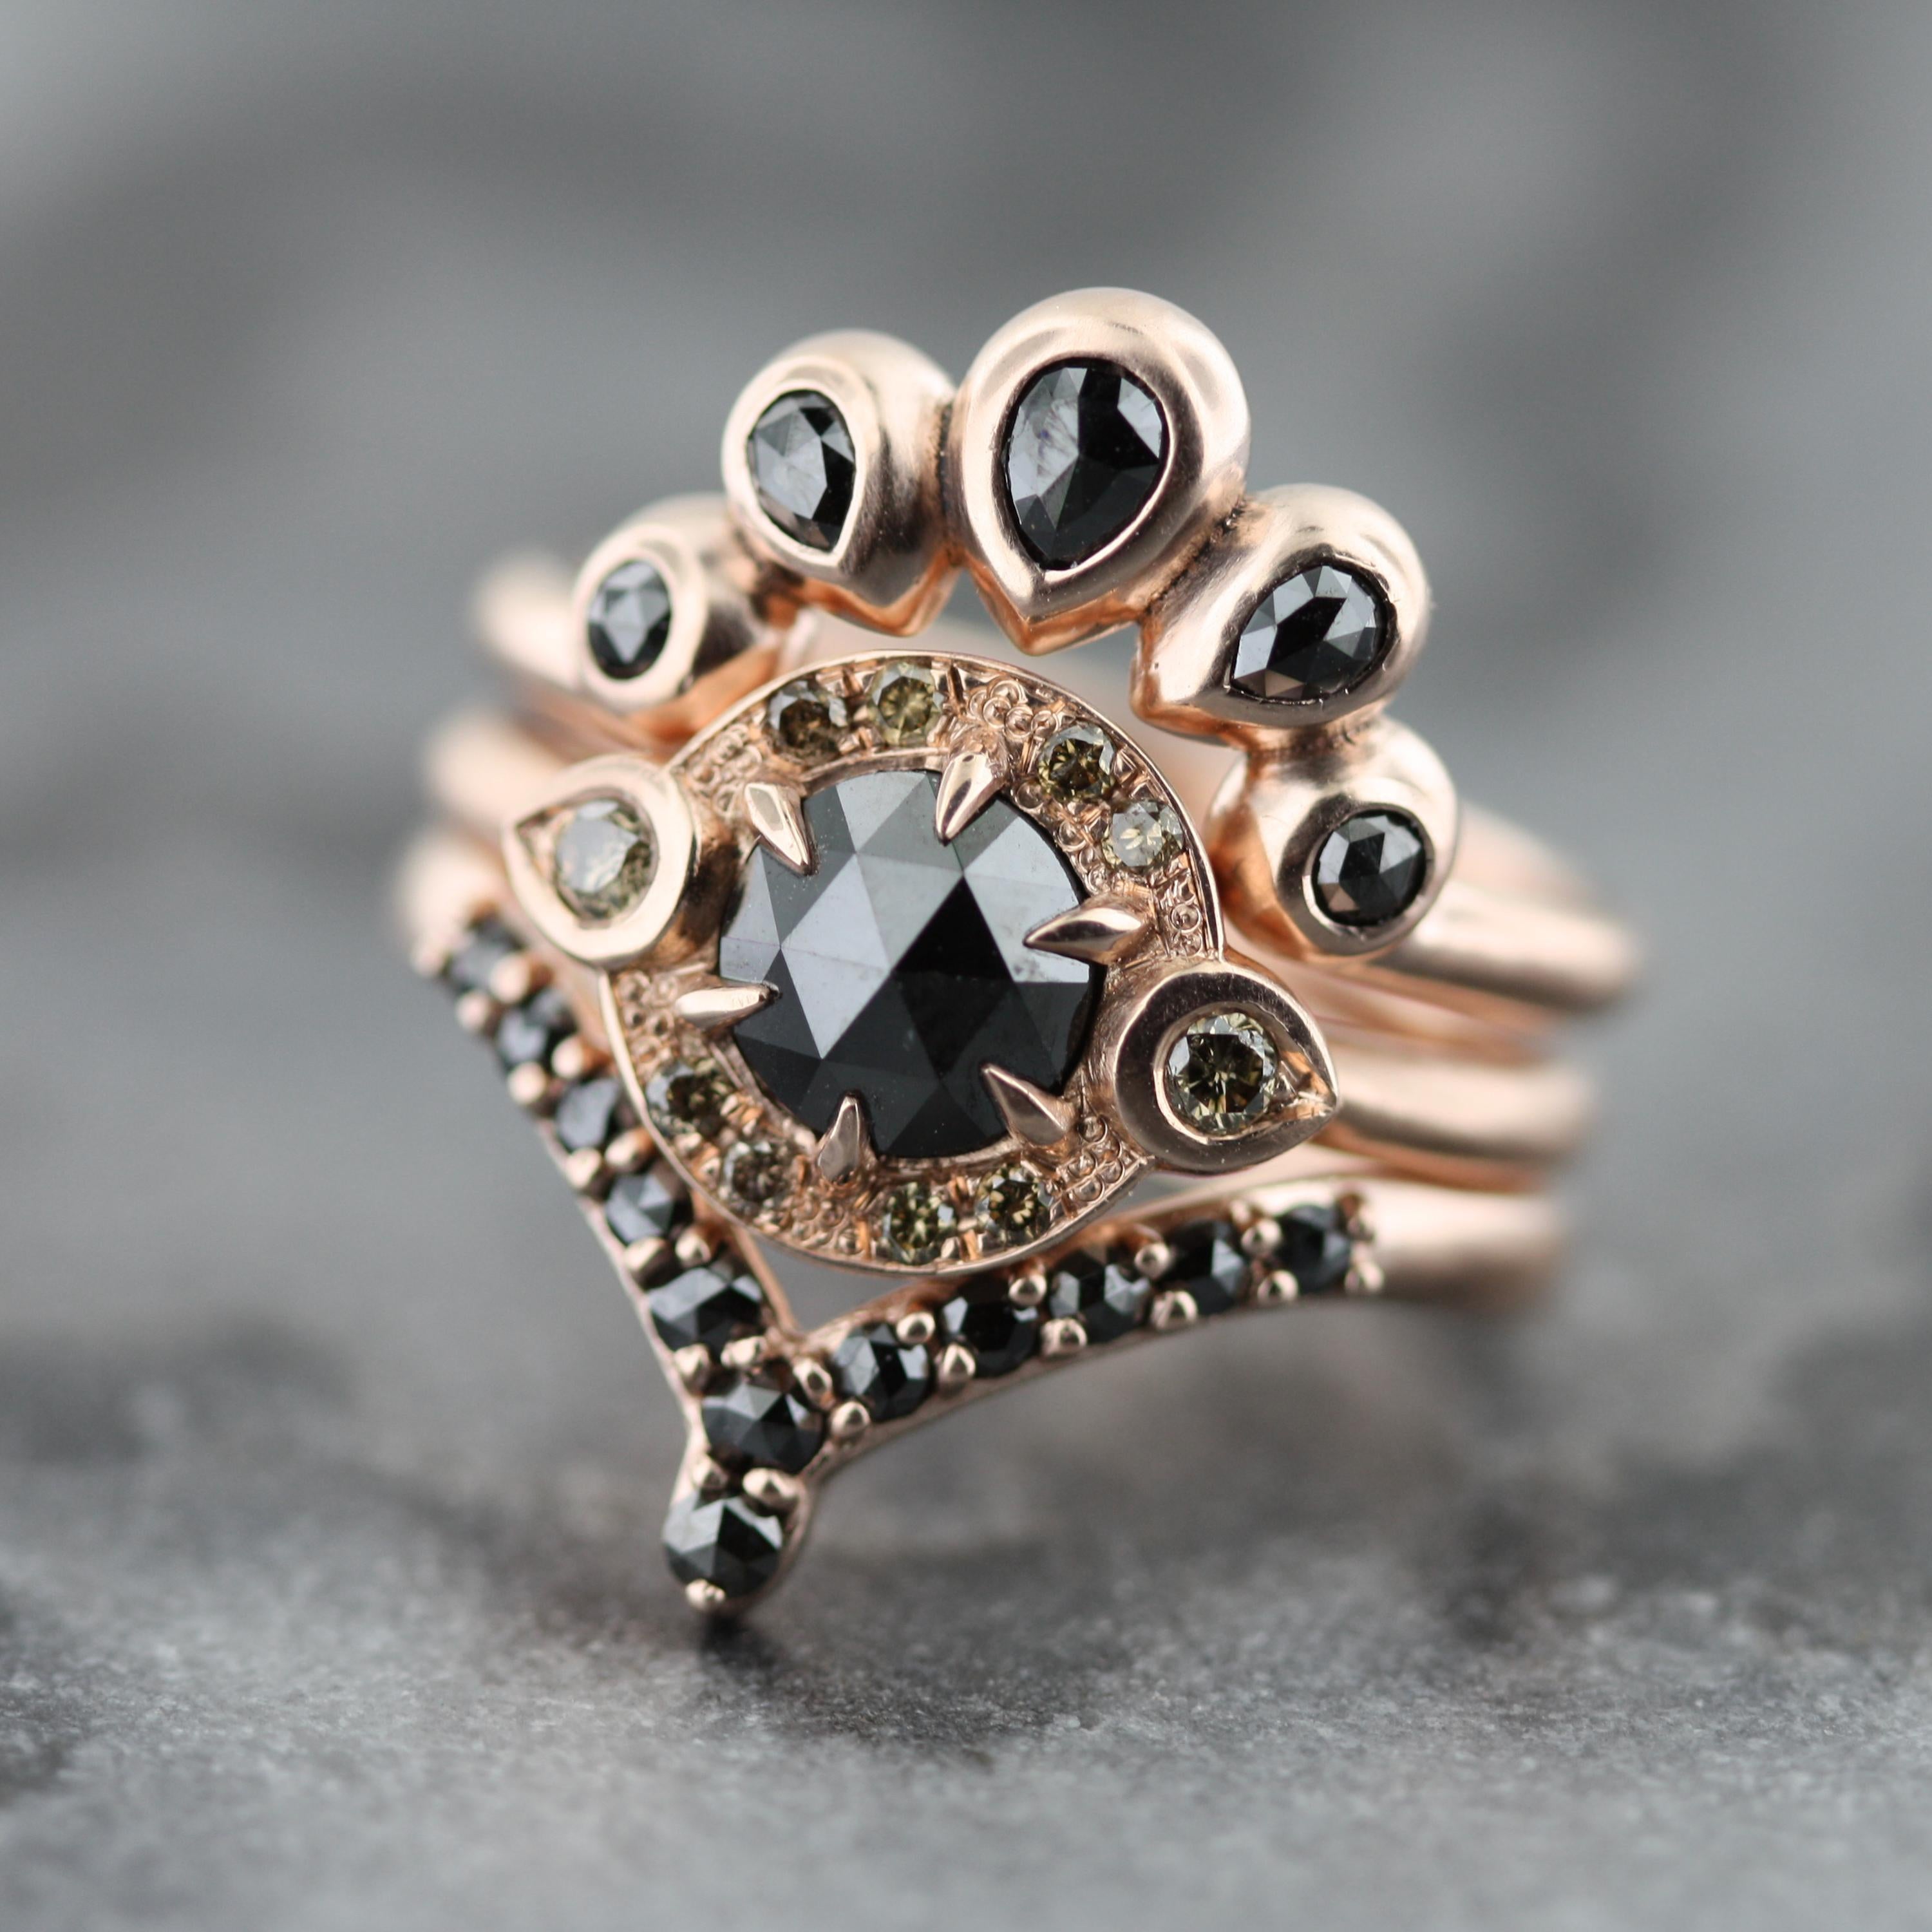 Modern edgy Art Deco inspired ring stack. Over 1 carat of black and champagne diamonds glitter in this 14K rose gold 3 ring set. 

- Finger size 6.5
- Available for customization
- Appraisals included